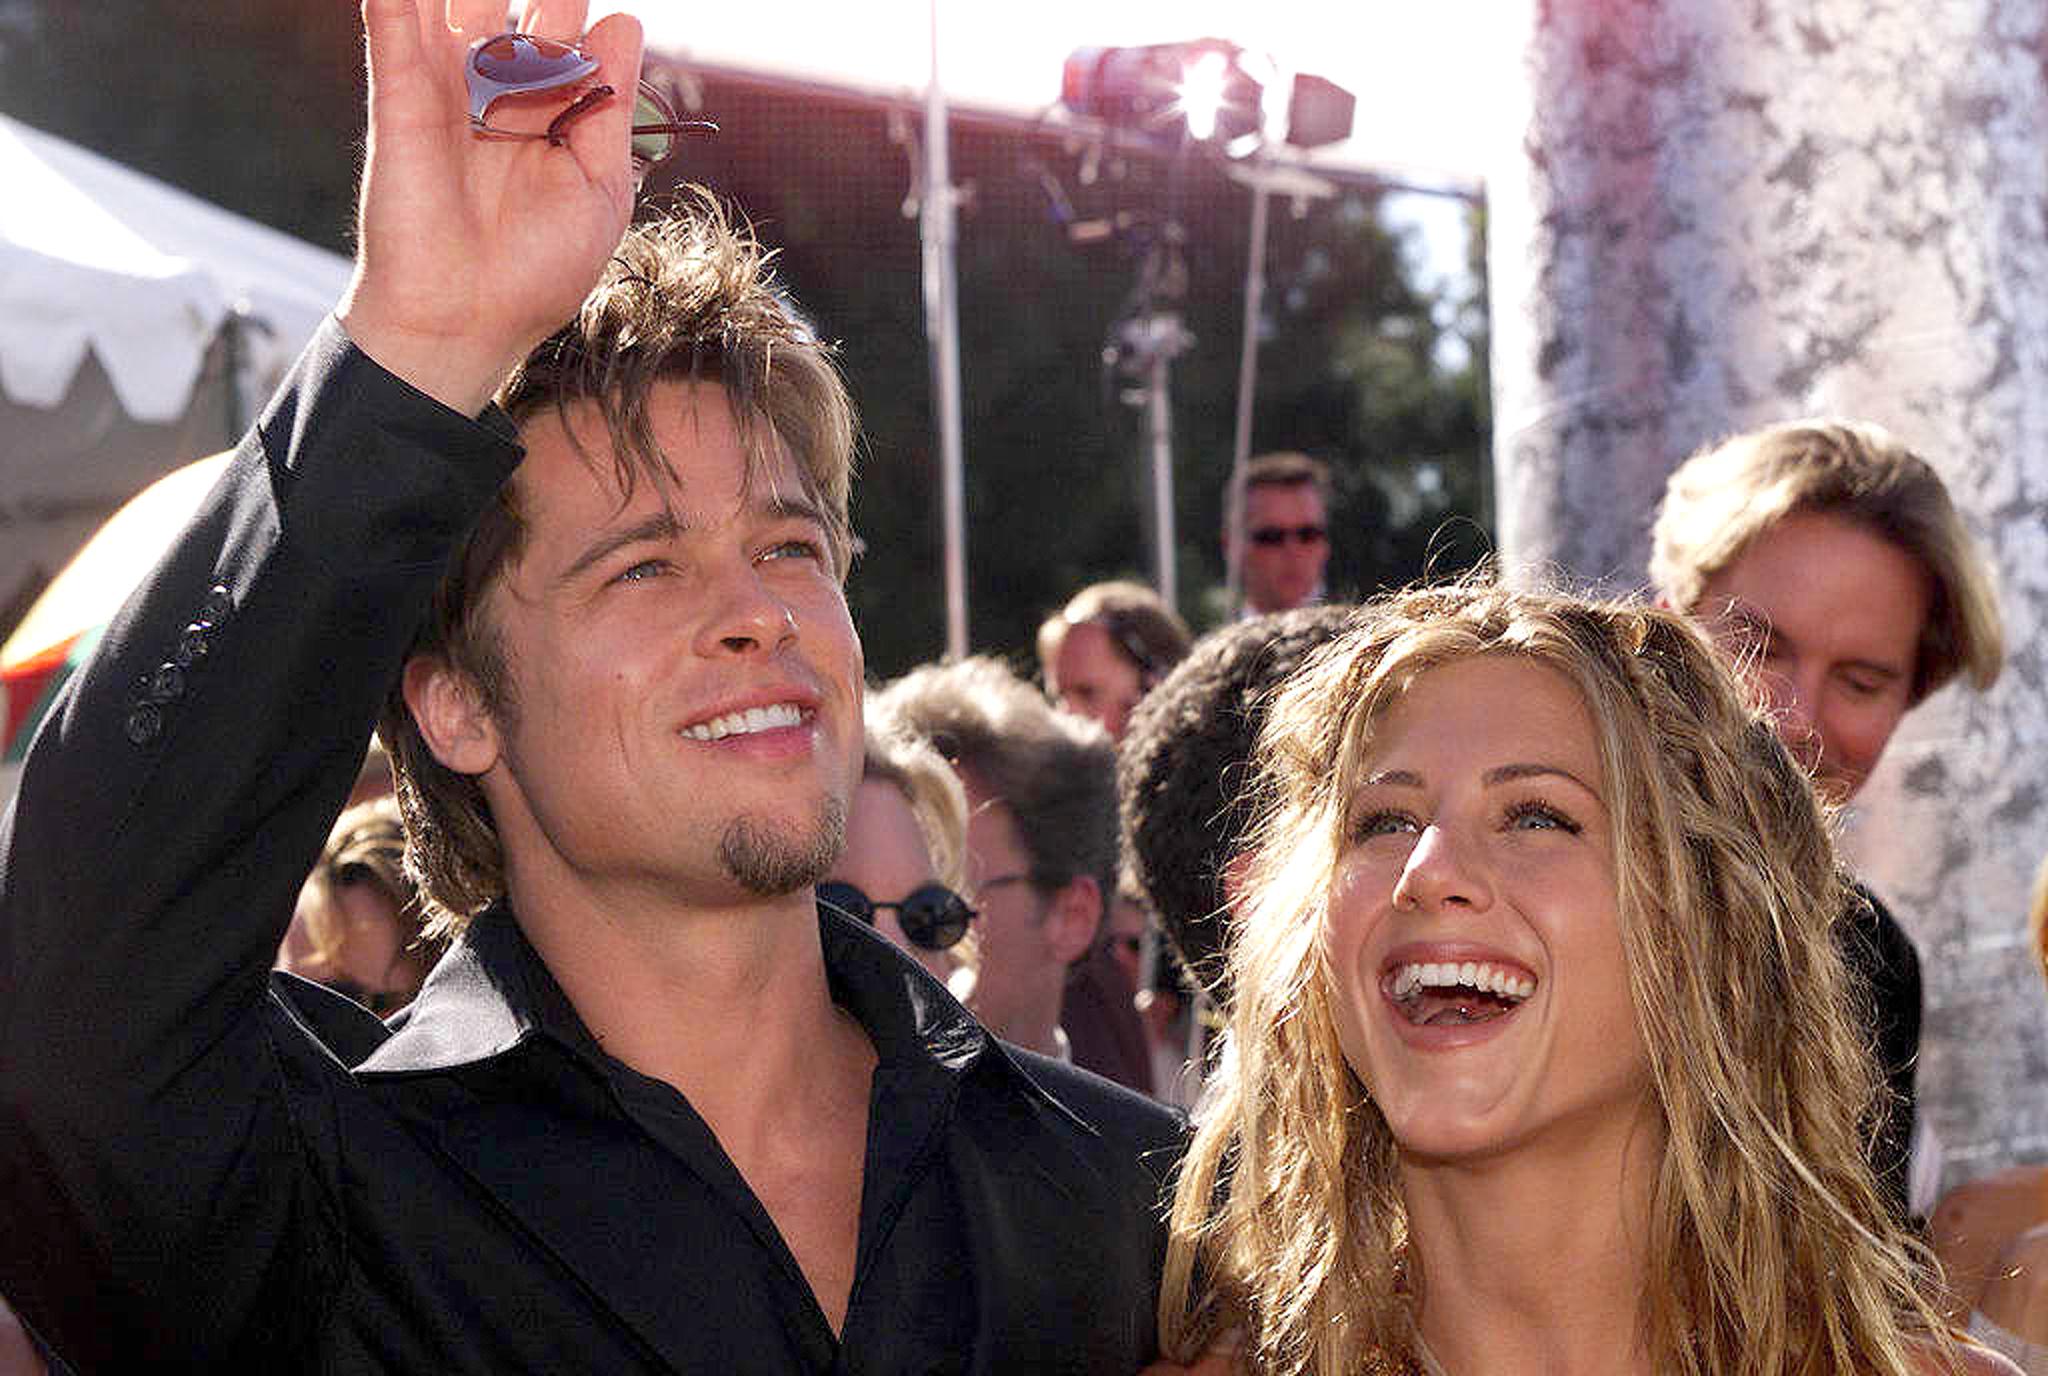 Brad Pitt and Jennifer Aniston arrive for the 51st Emmy Awards on  Sept. 12, 1999 in Los Angeles, California.